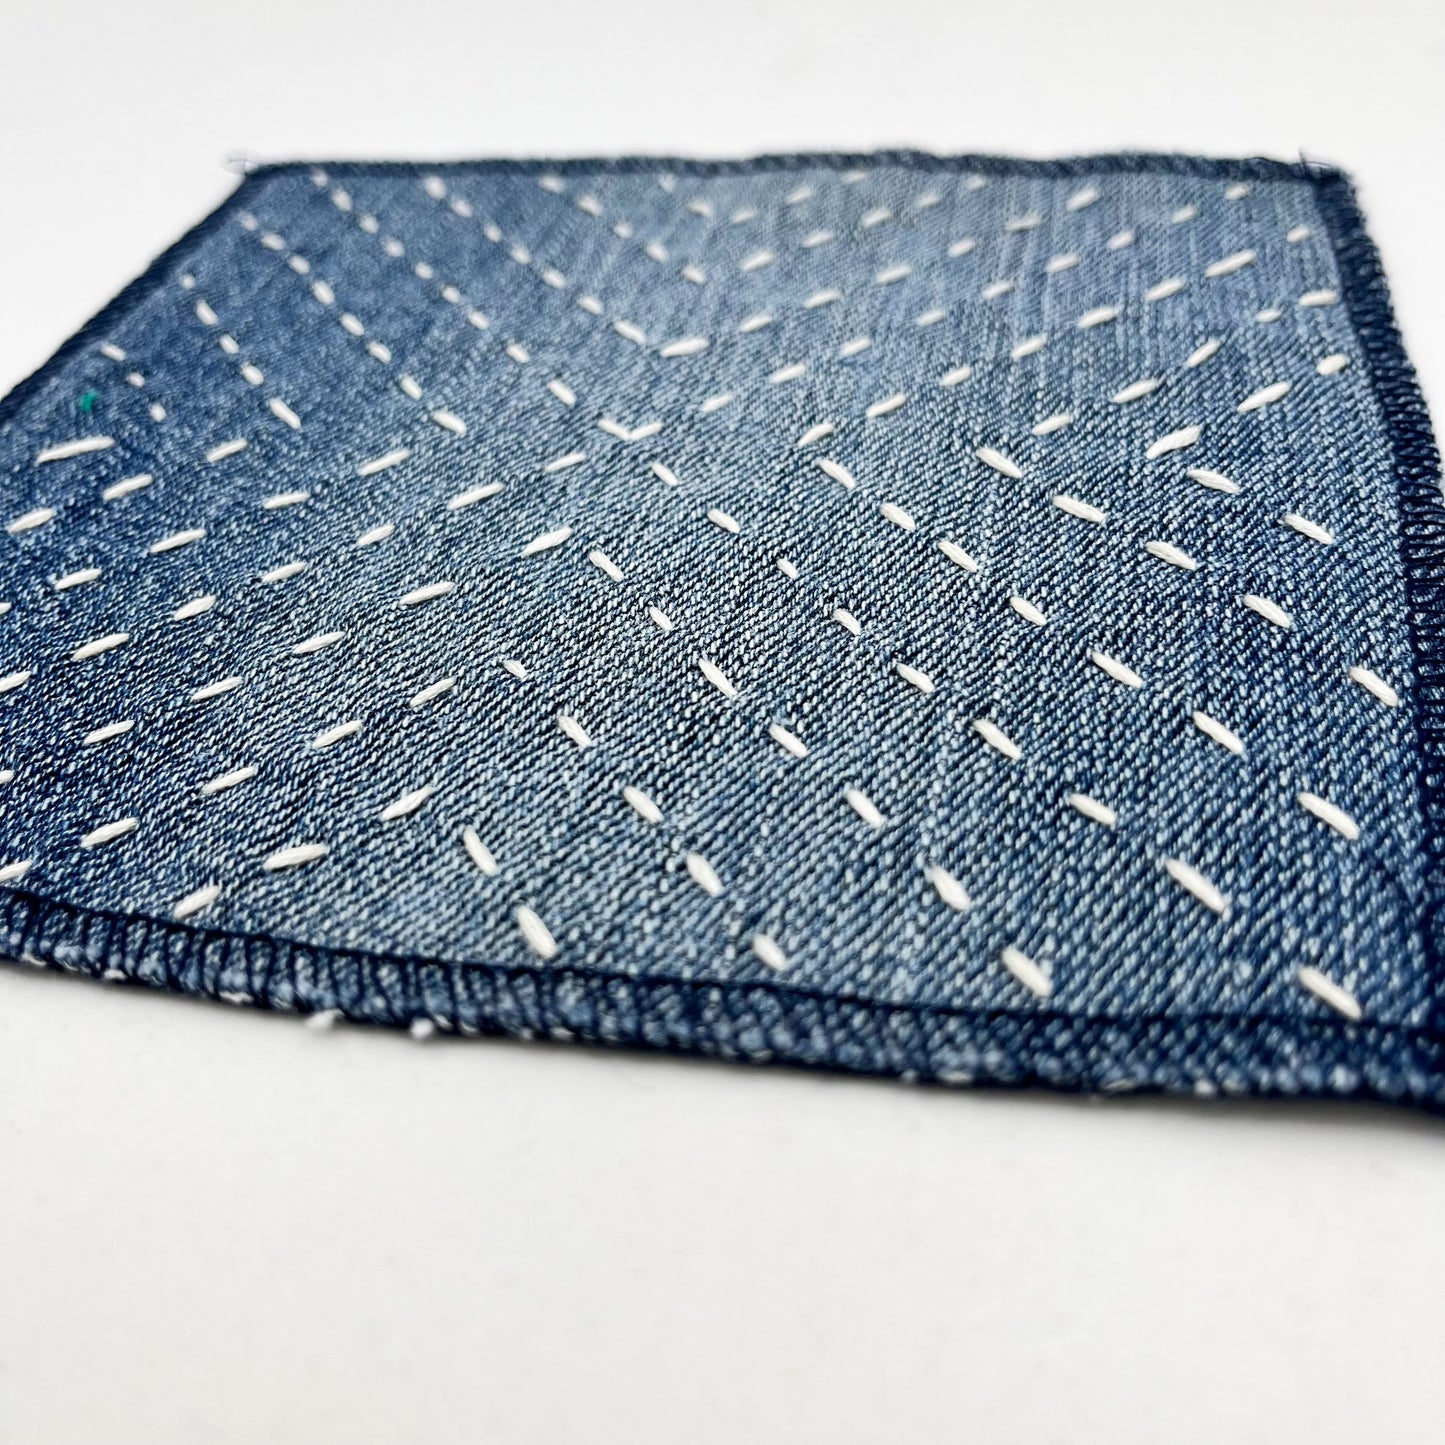 close up angled view of a square patch made out of denim, handstitched with ivory running stitches in a radiating X pattern, with overlocked edges, on a white background